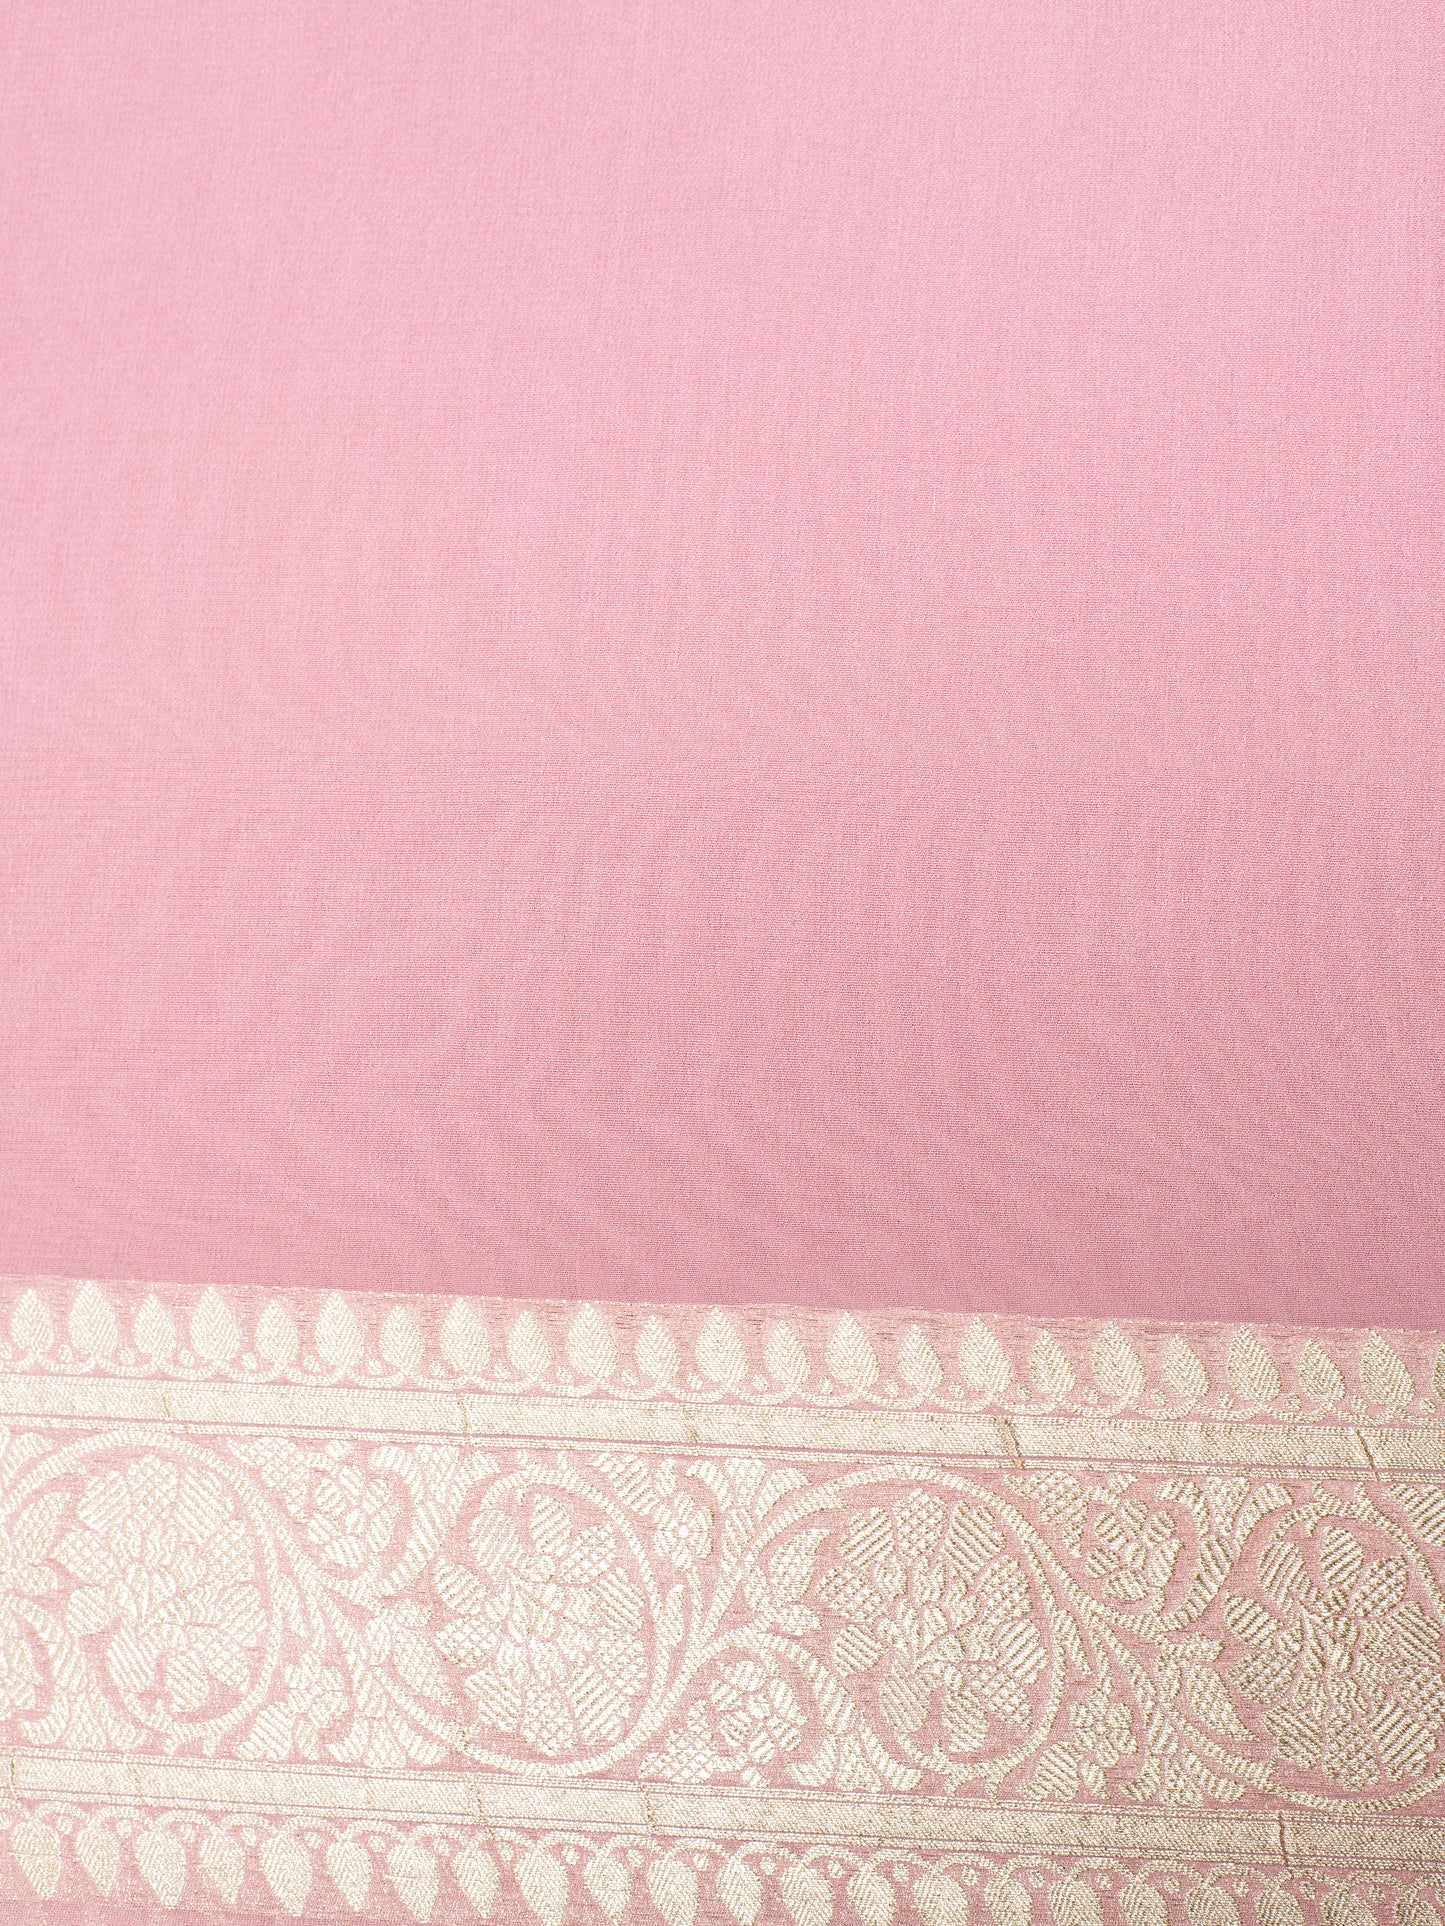 Handwoven Puce Pink Georgette Saree